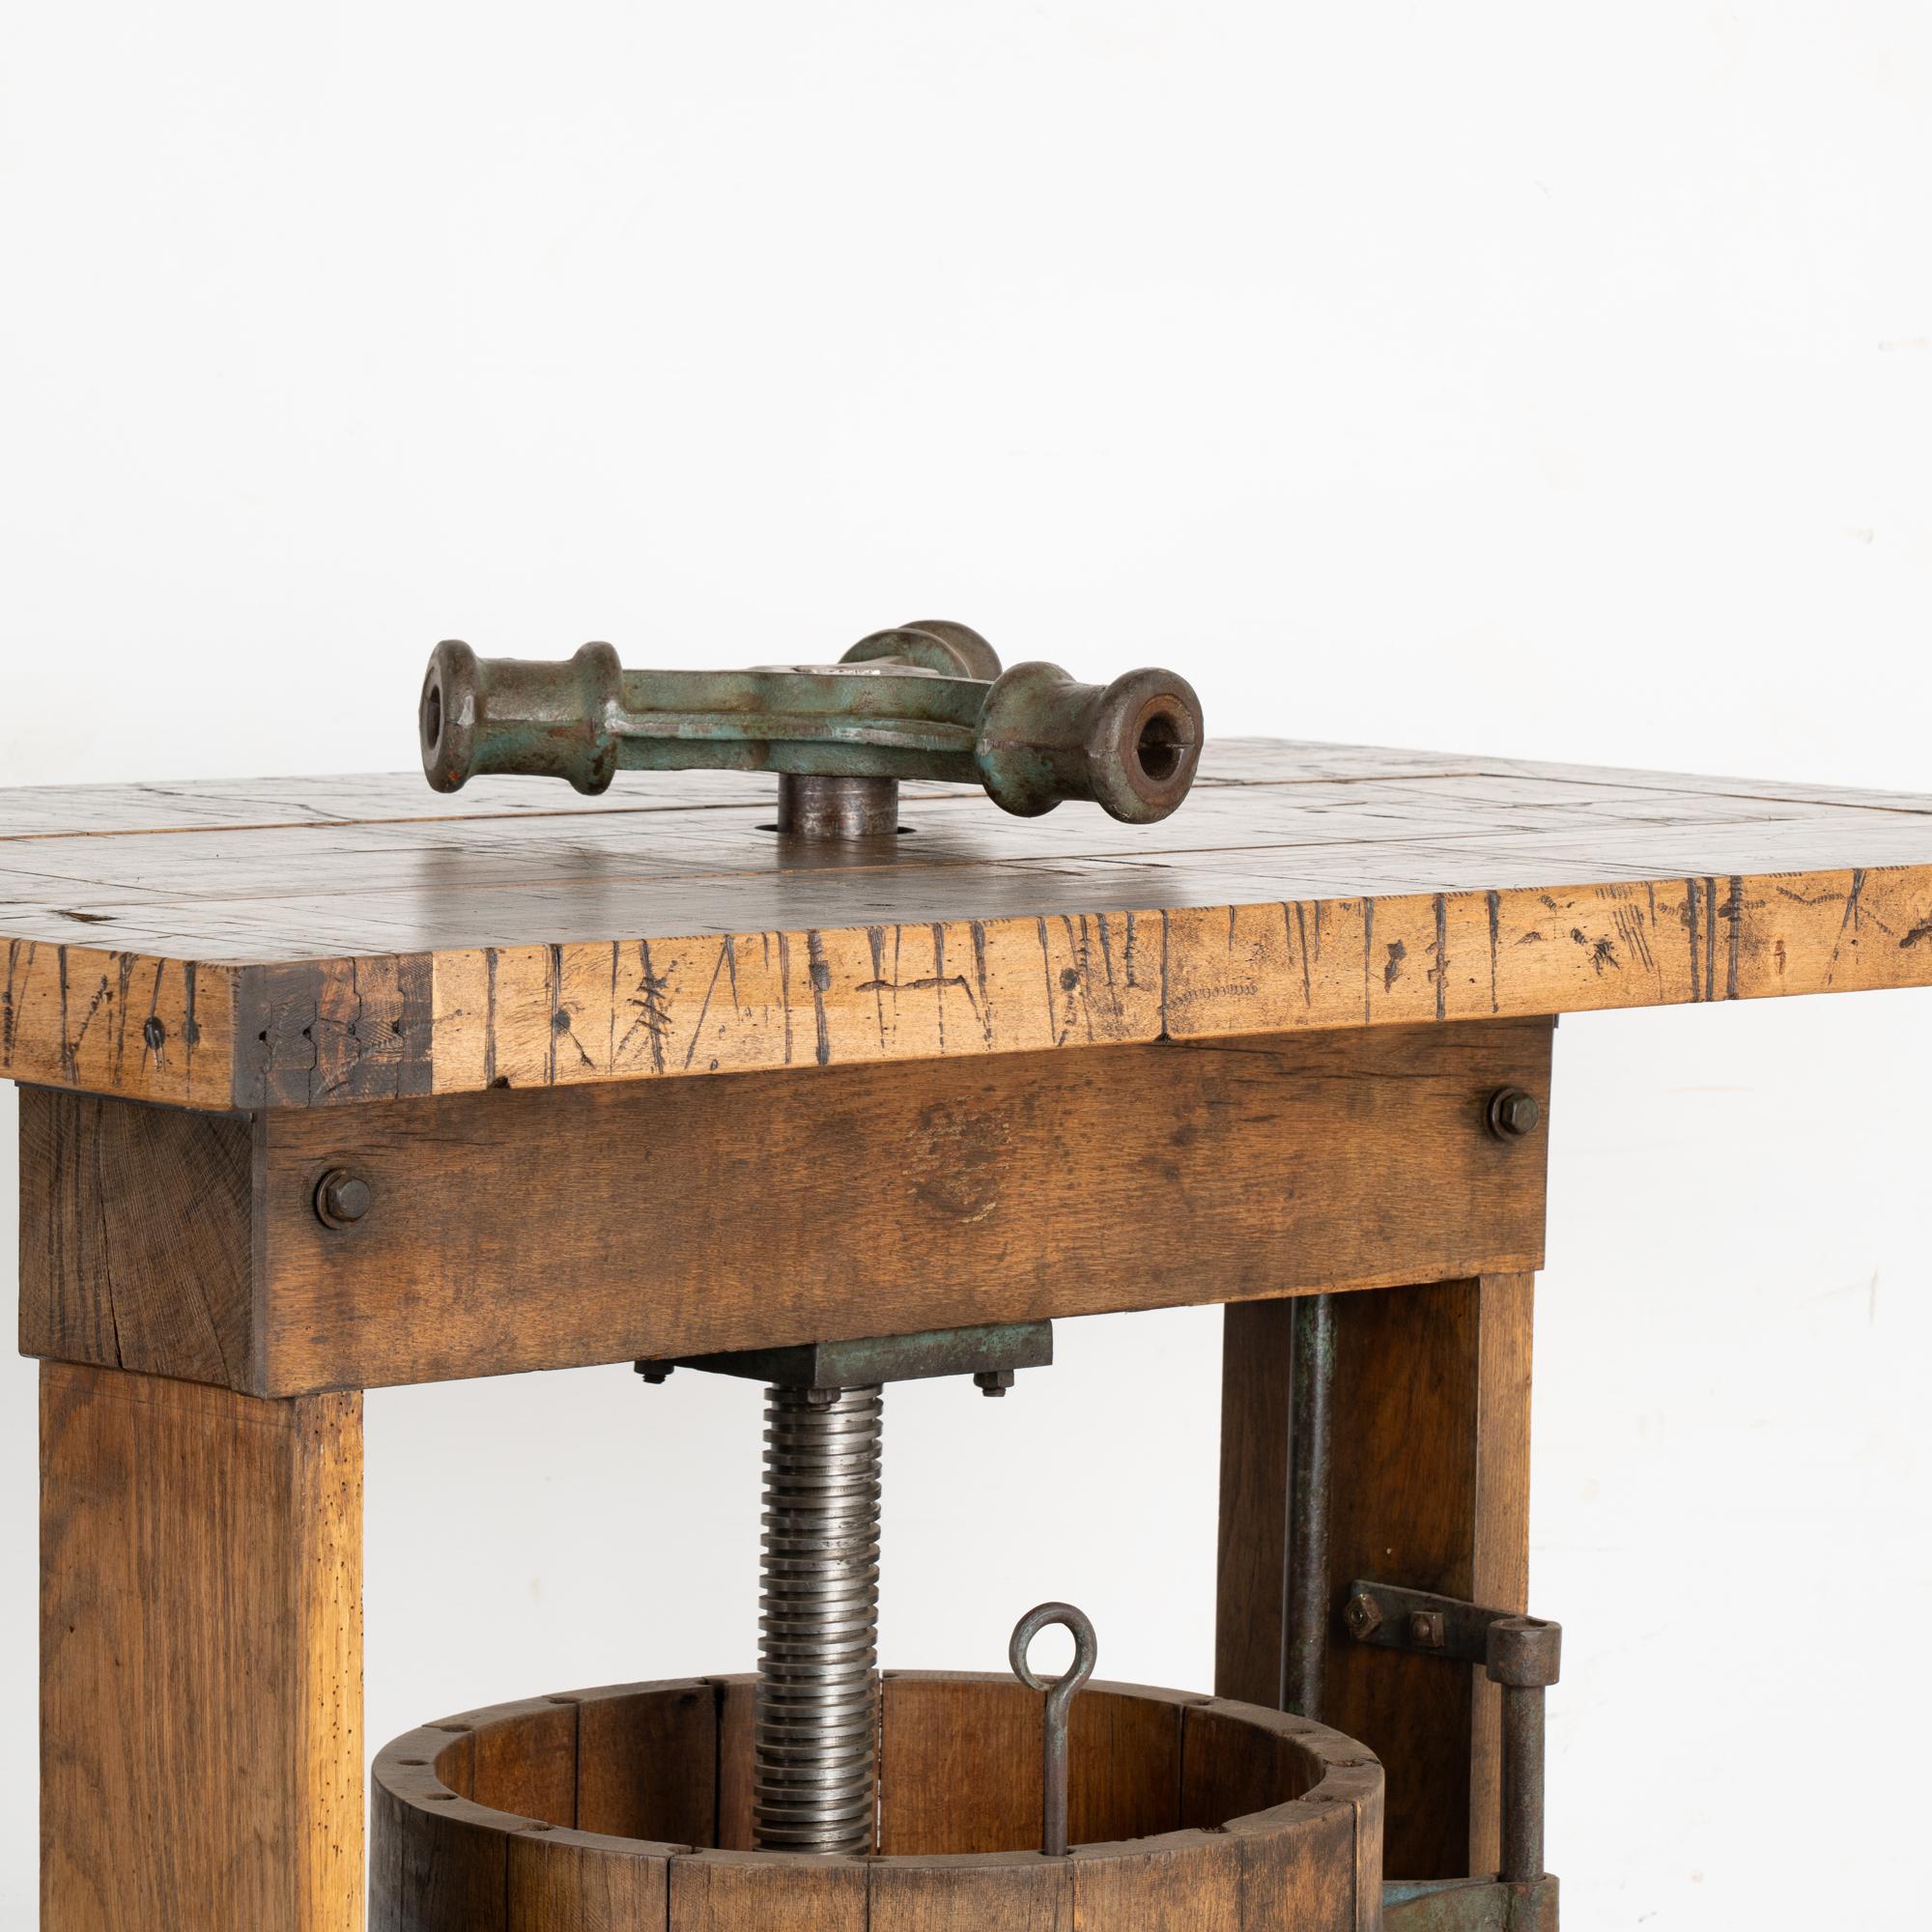 Wrought Iron Wine Tasting Table Standing Bar from Old Wine Press, Hungary circa 1900